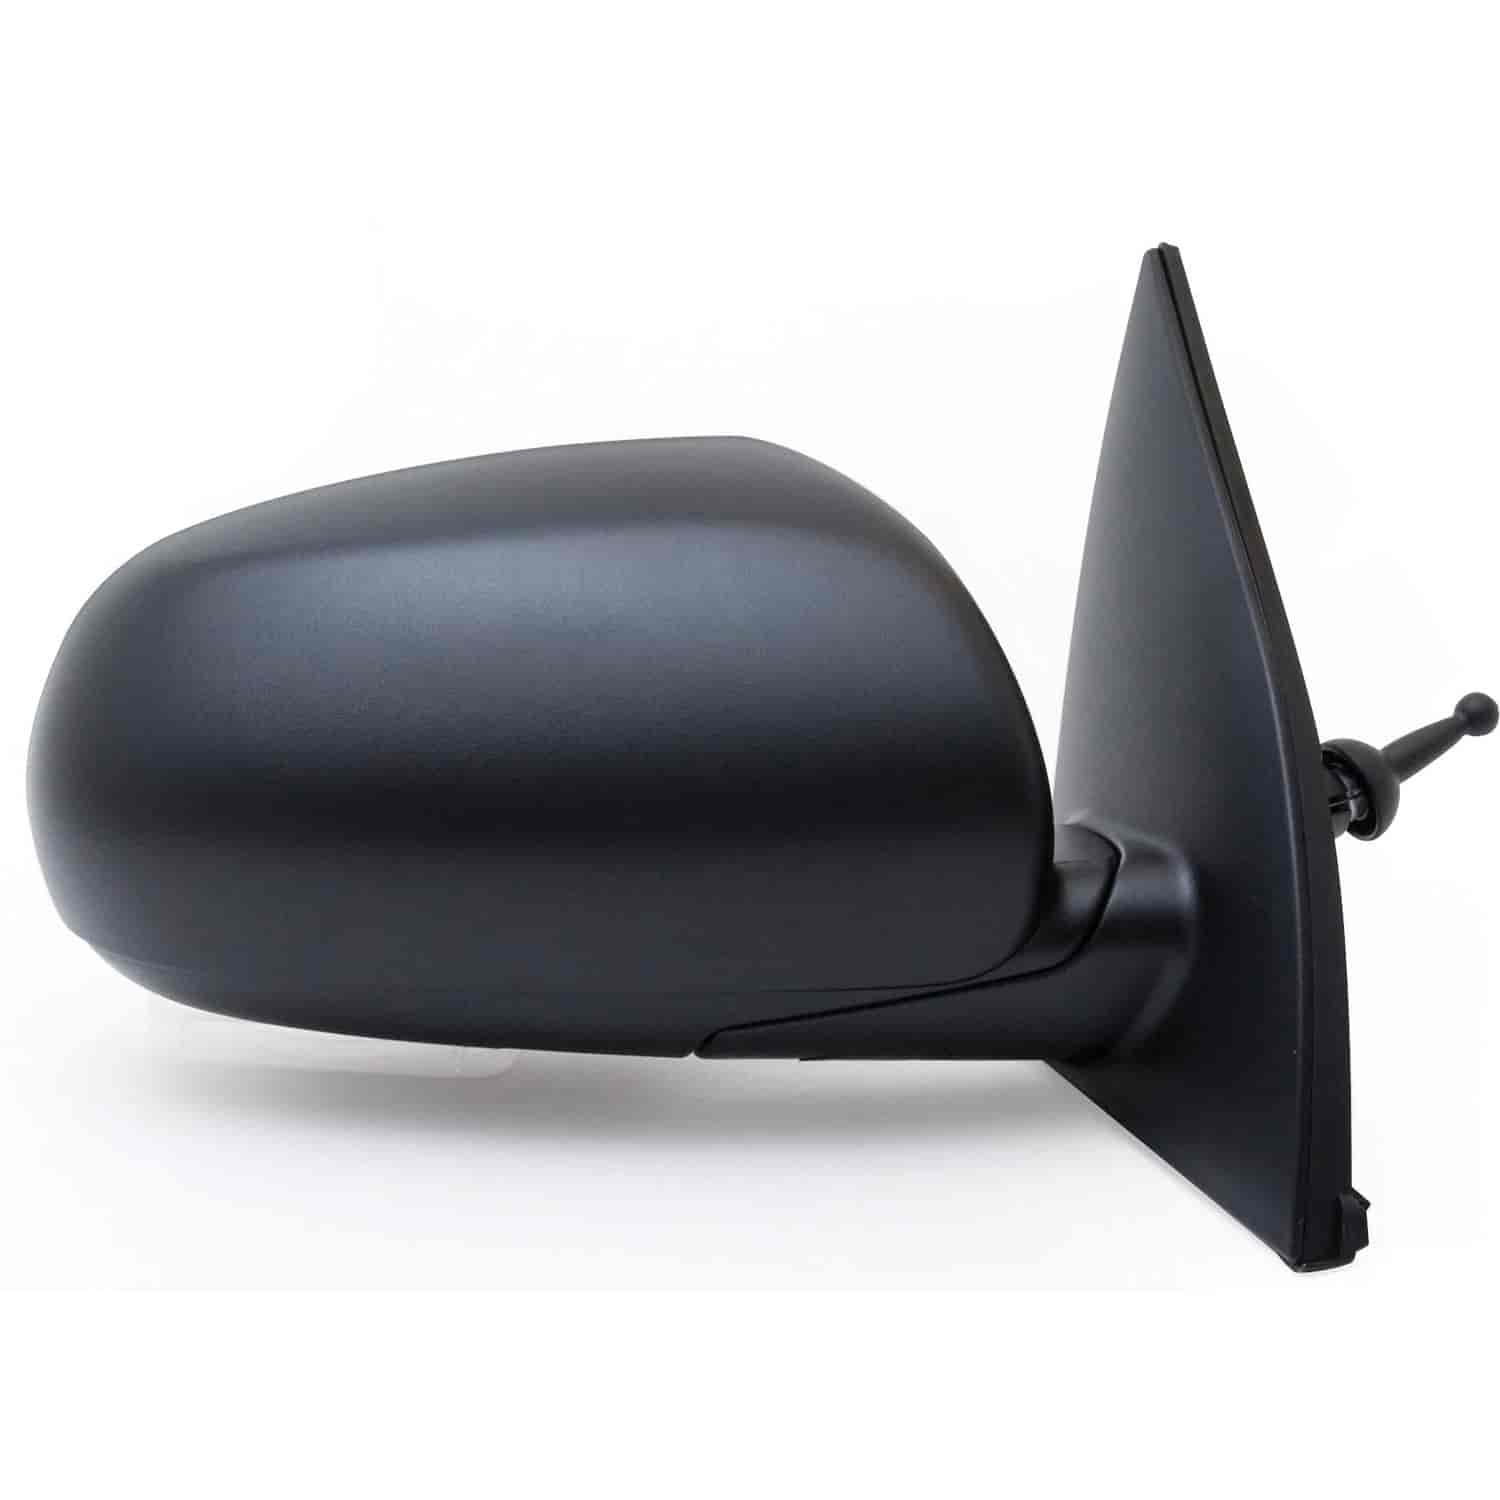 OEM Style Replacement mirror for 10-11 Hyundai Accent Sedan/ Hatchback passenger side mirror tested